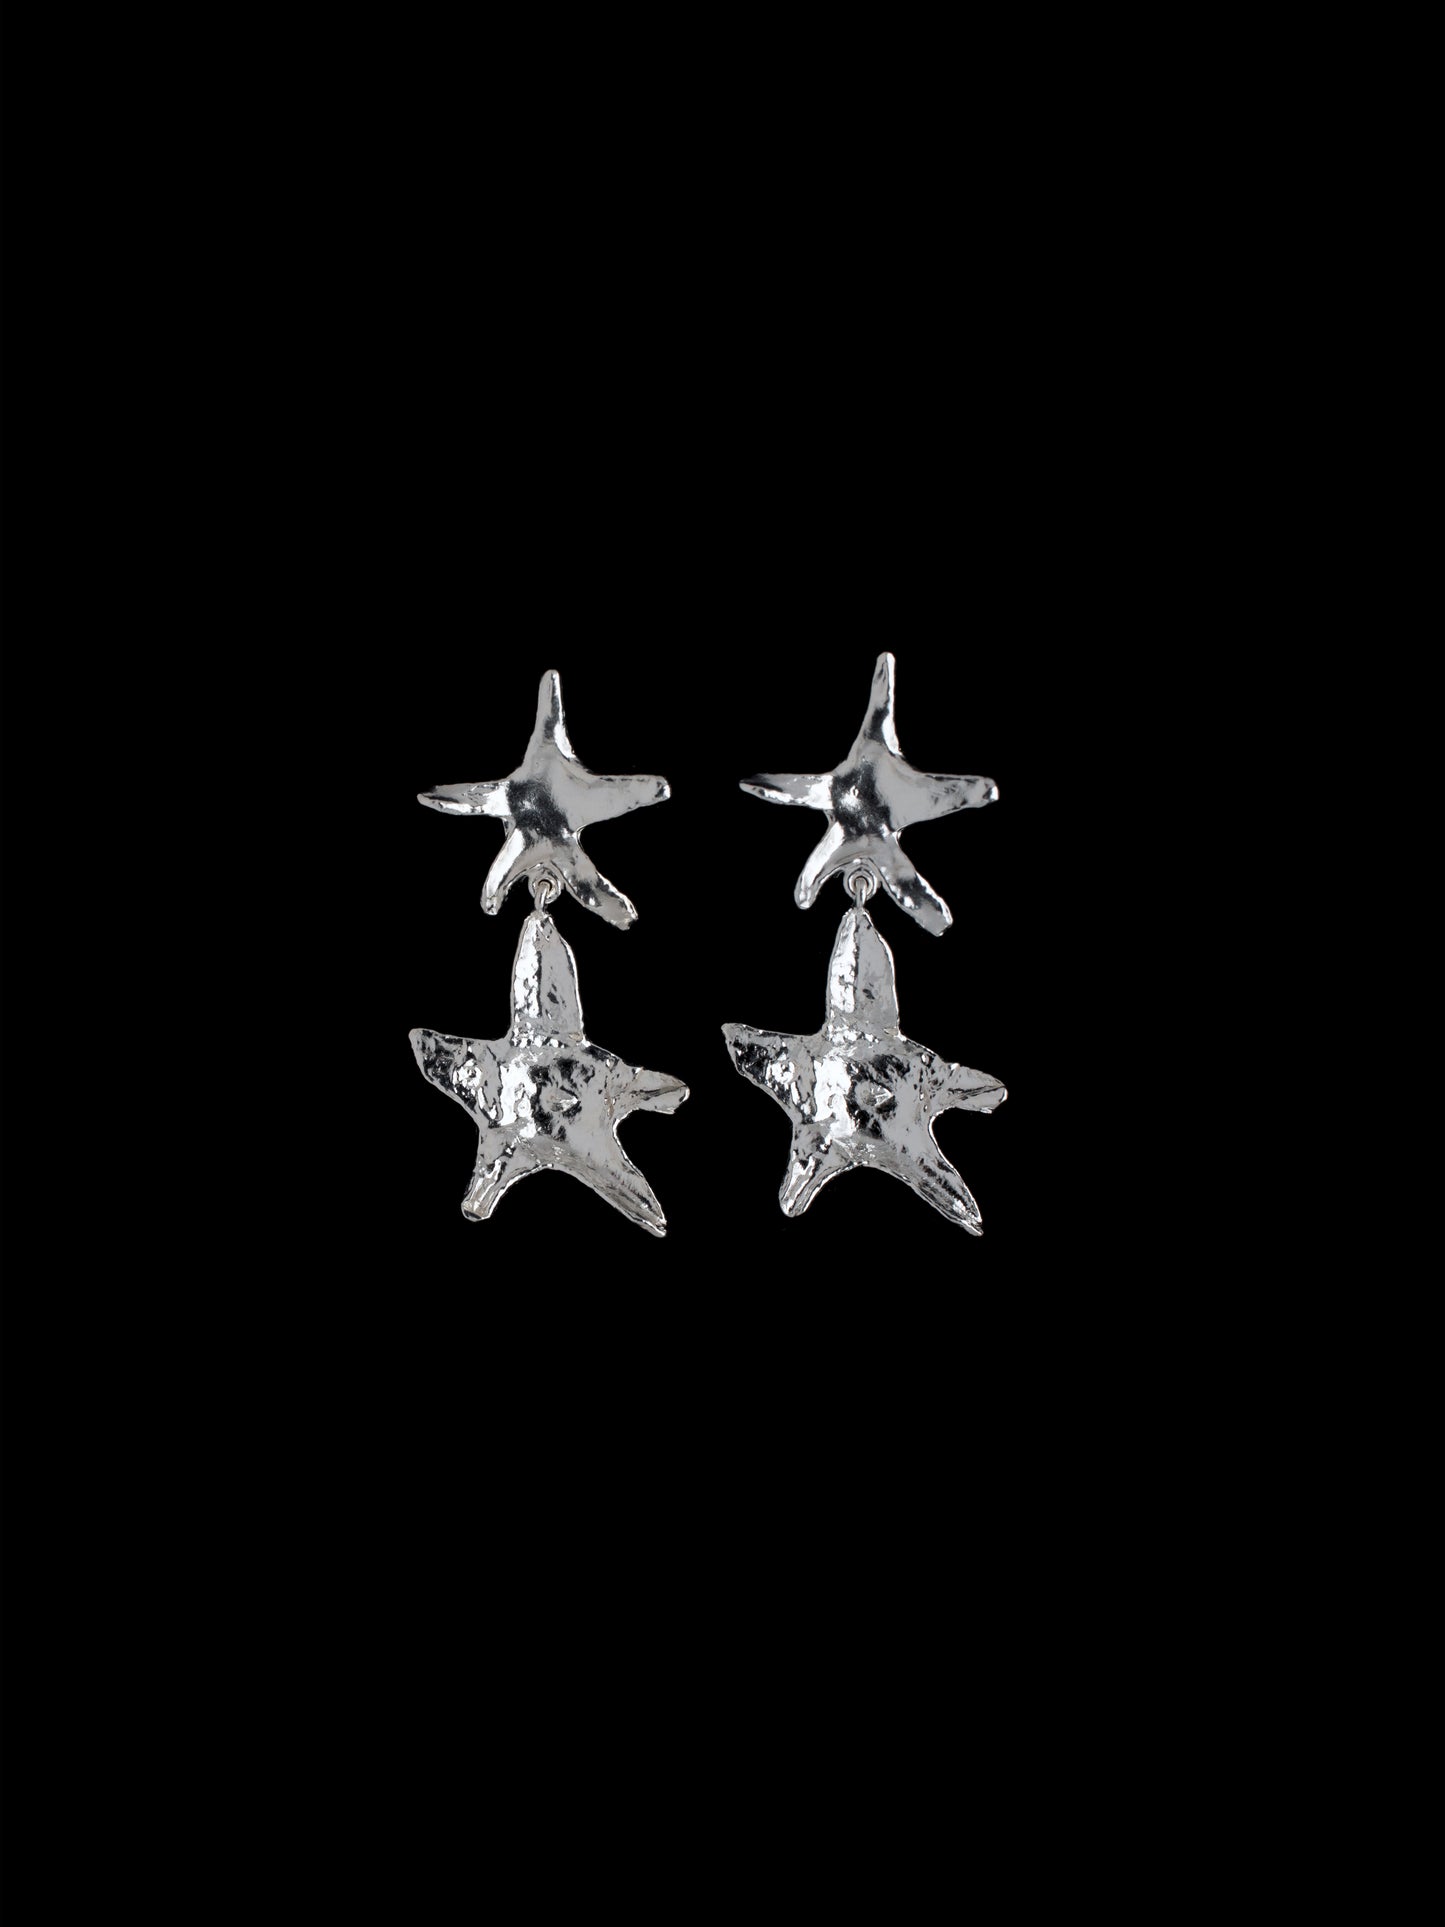 ORGANIC DOUBLE STAR-SHAPED PENDANT EARRINGS HANDMADE IN RECYCLED SILVER